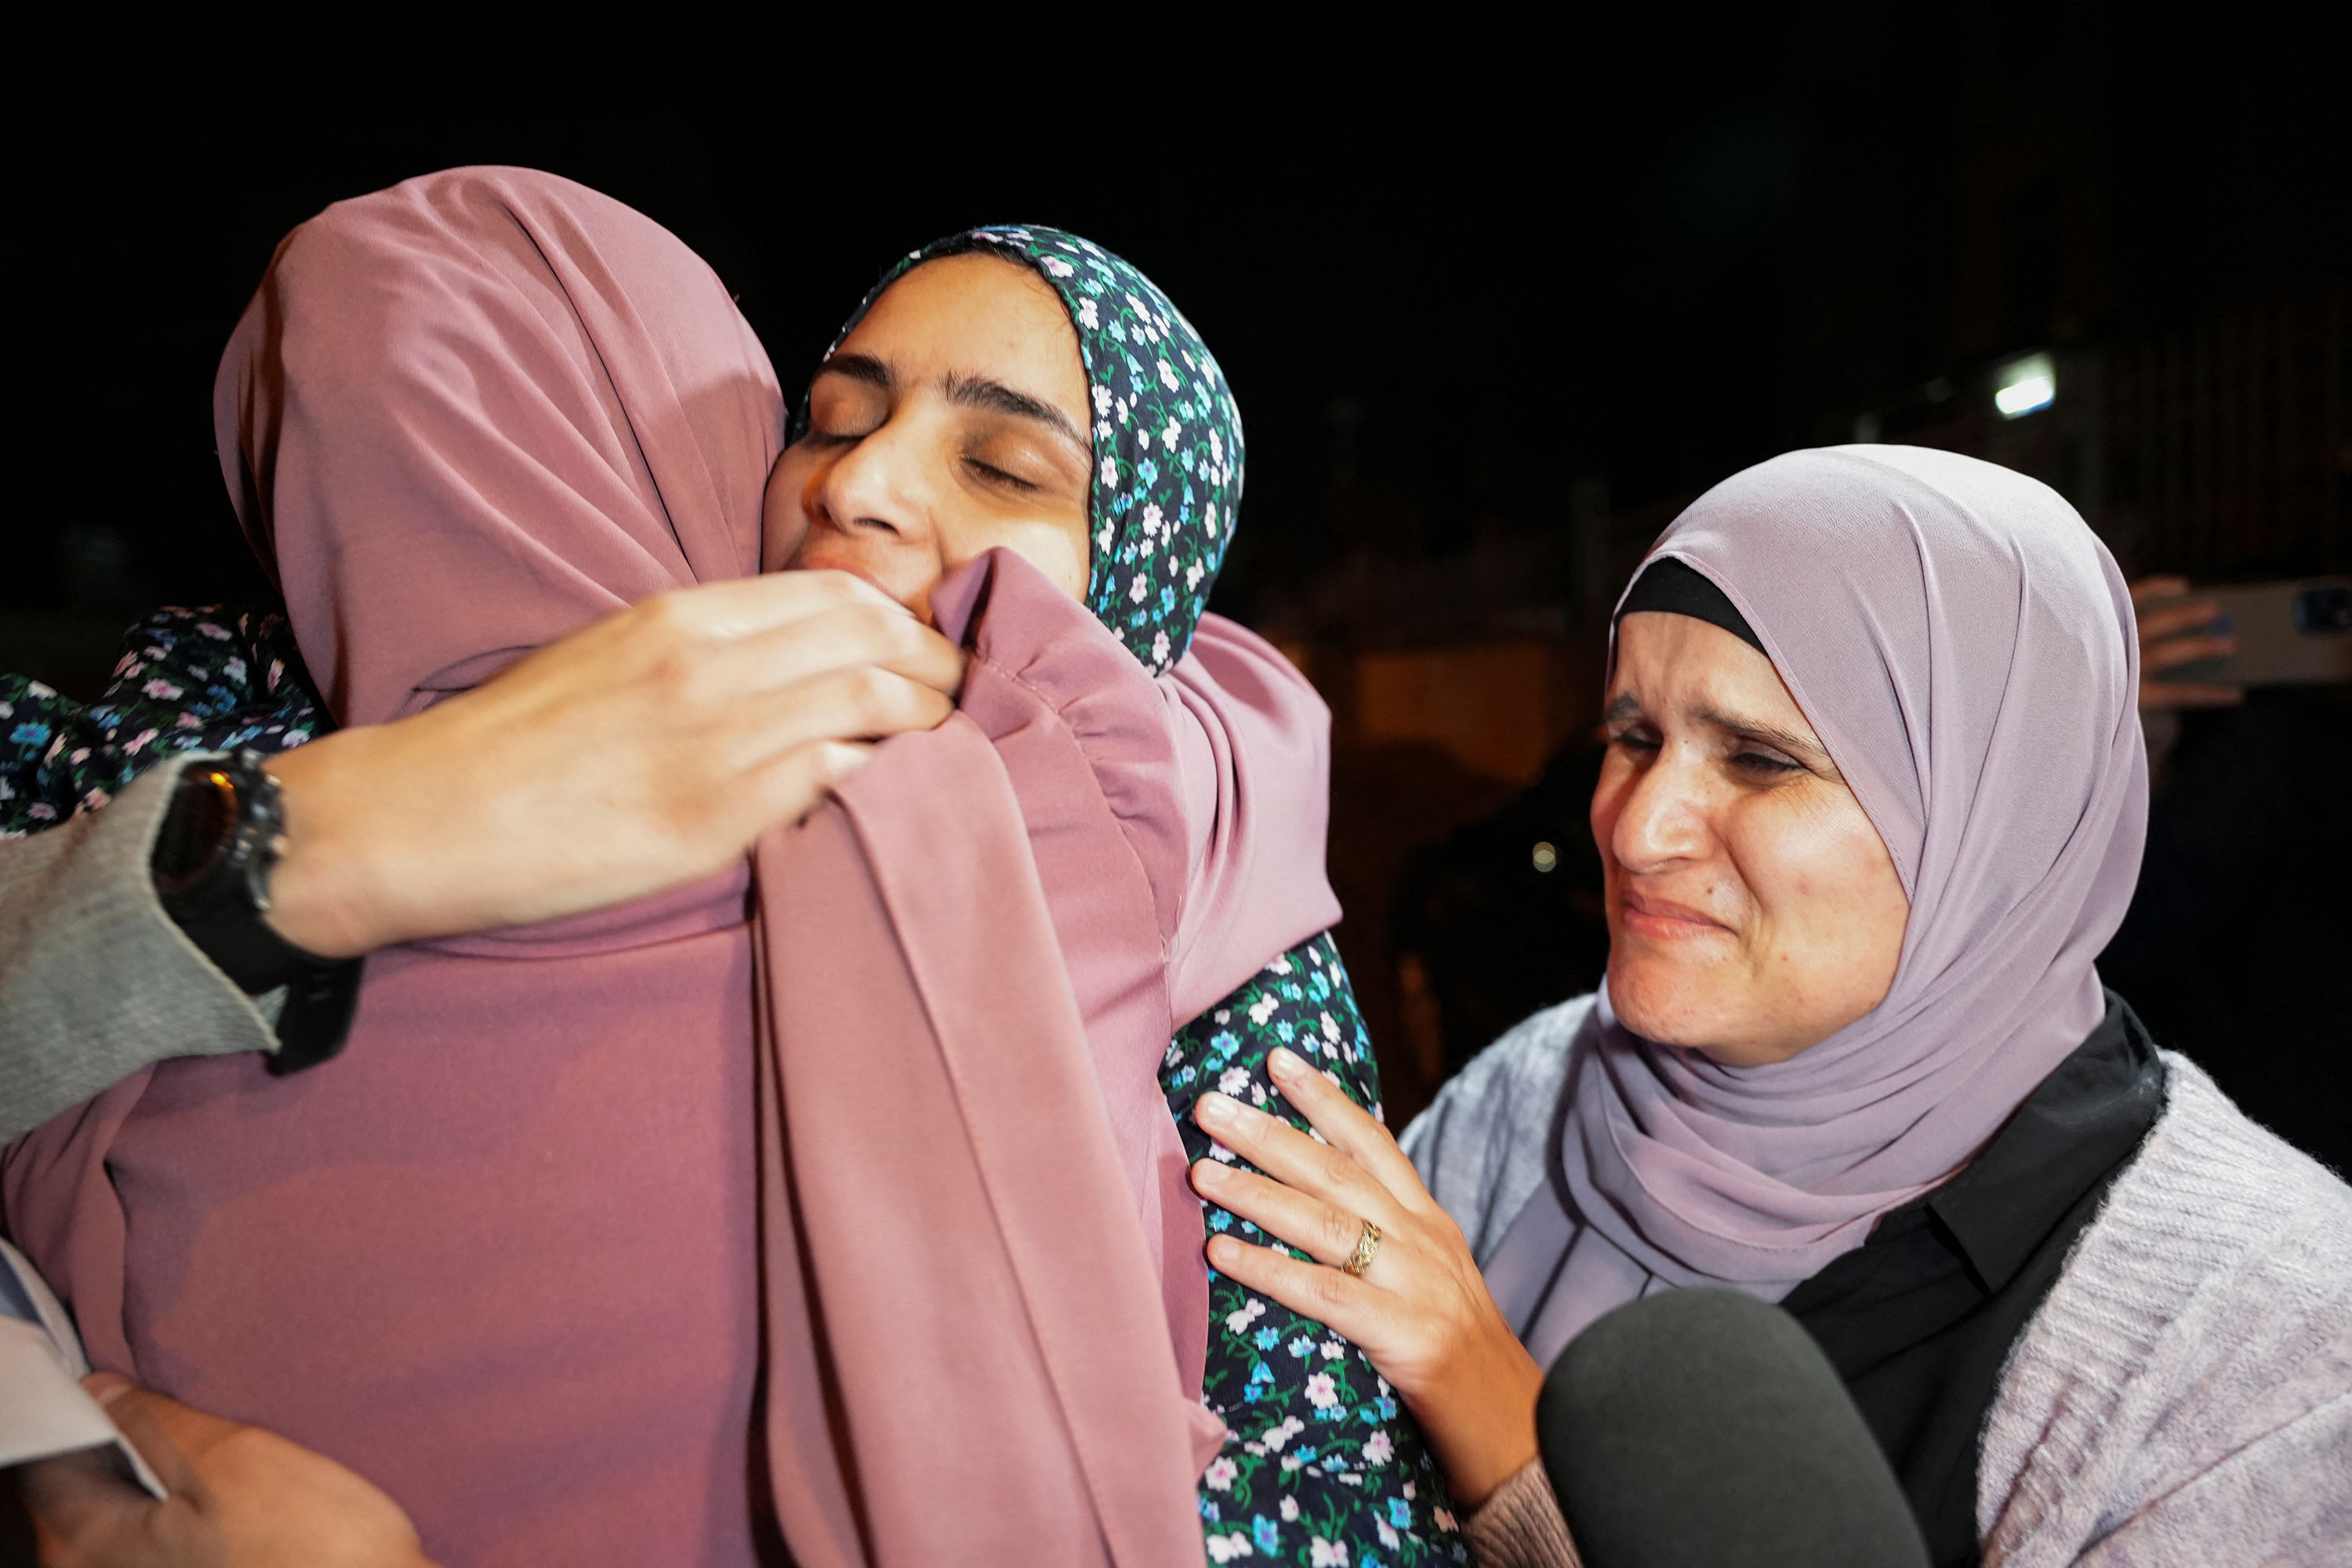 Released Palestinian prisoner Marah Bkeer embraces her family near her home in Jerusalem after being released in the hostages-prisoners swap deal between Hamas and Israel on November 24.